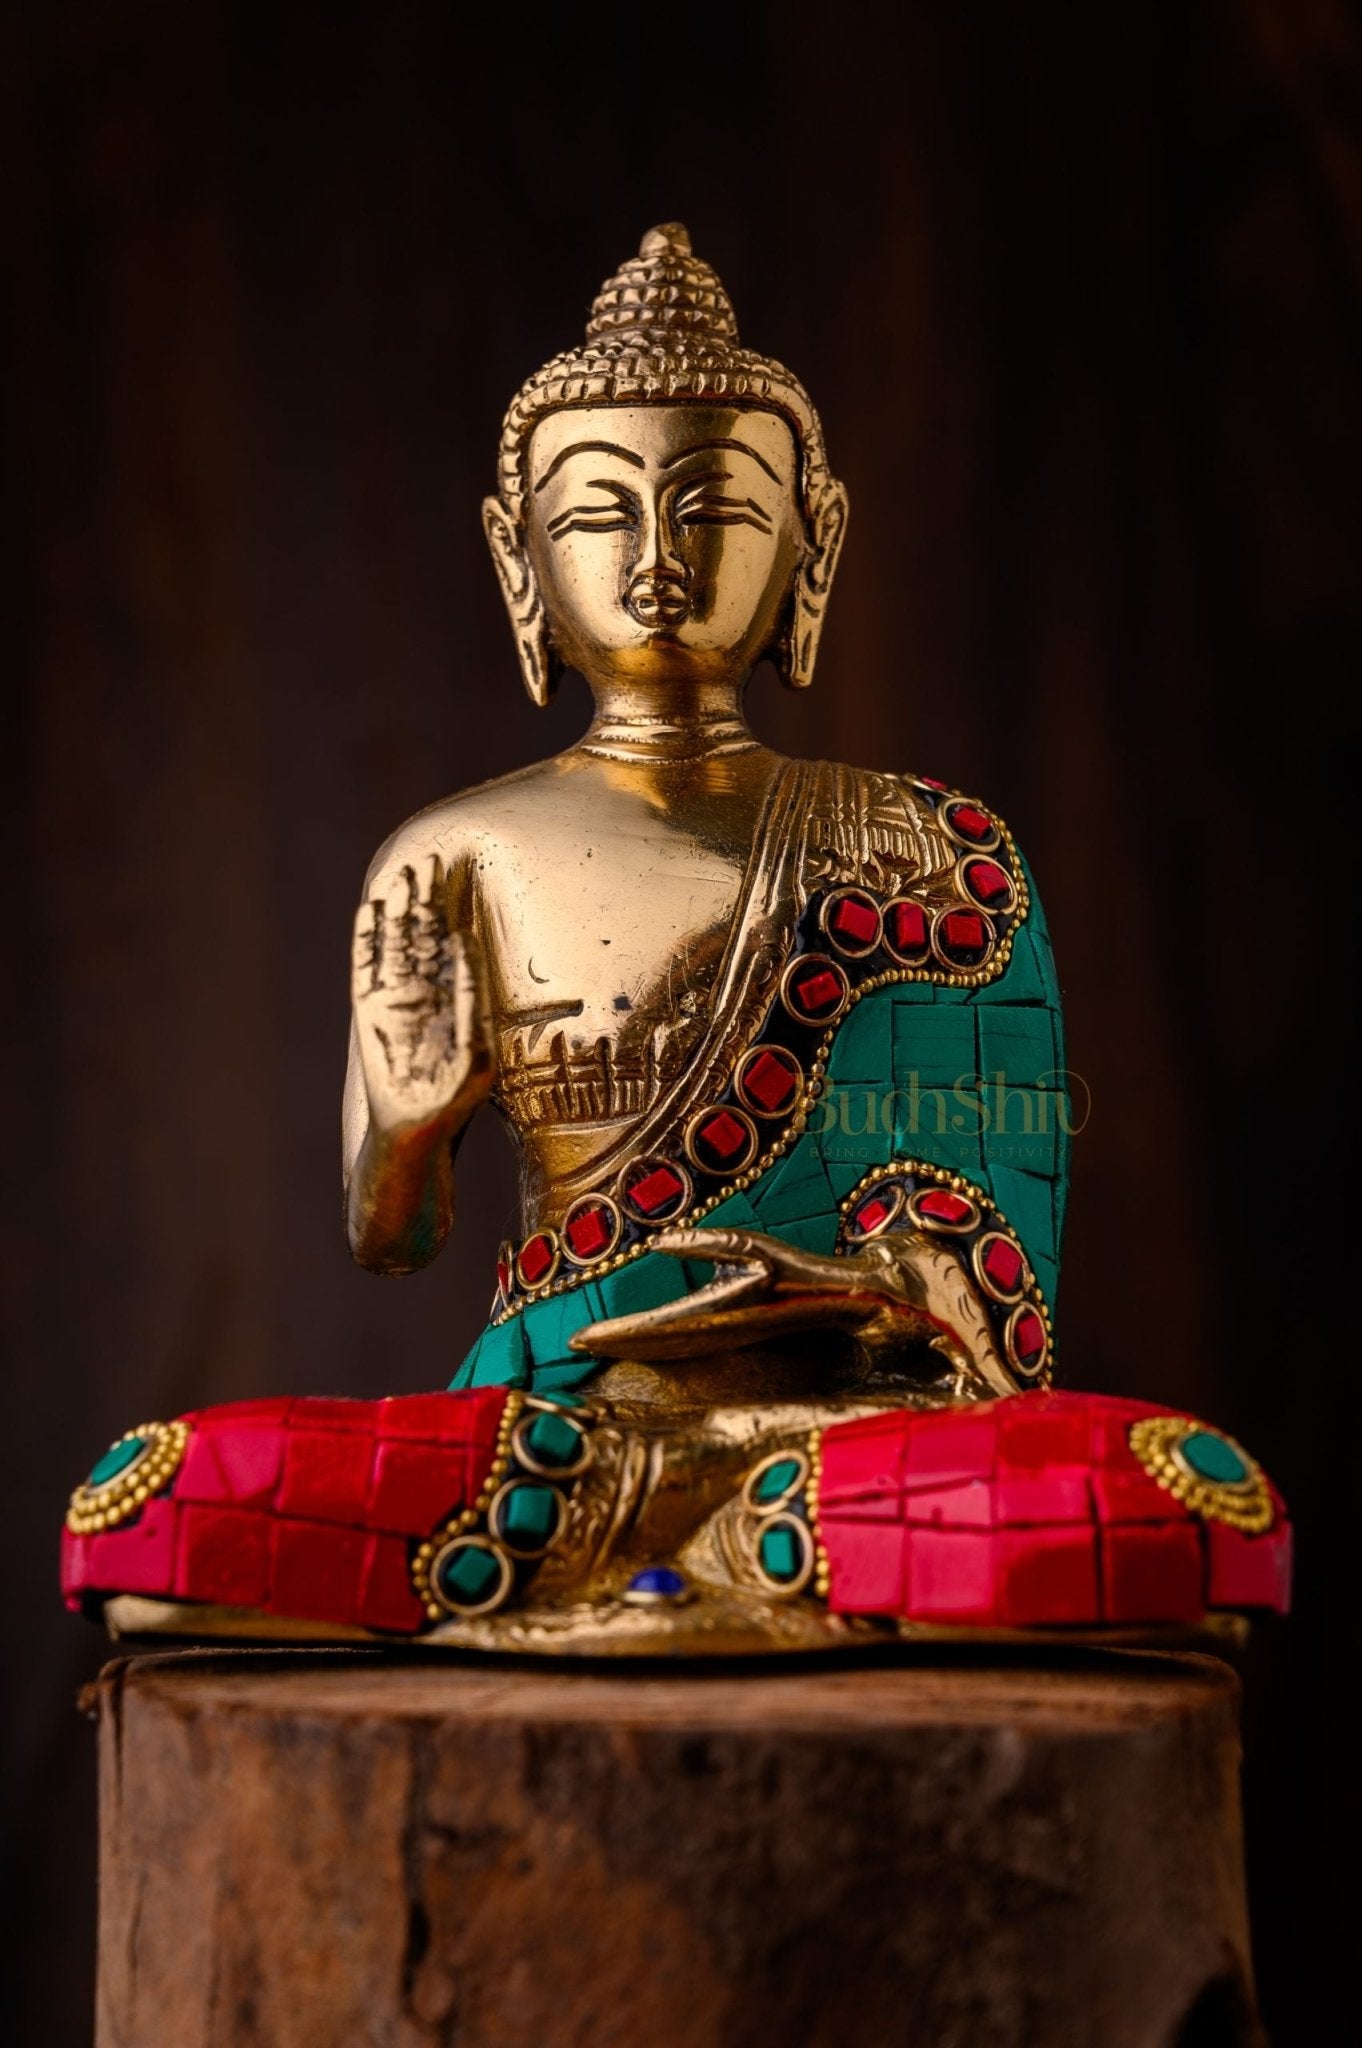 Handcrafted Brass Buddha Idol | Symbol of Enlightenment and Inner Peace | 7" x 5" x 3" - Budhshiv.com